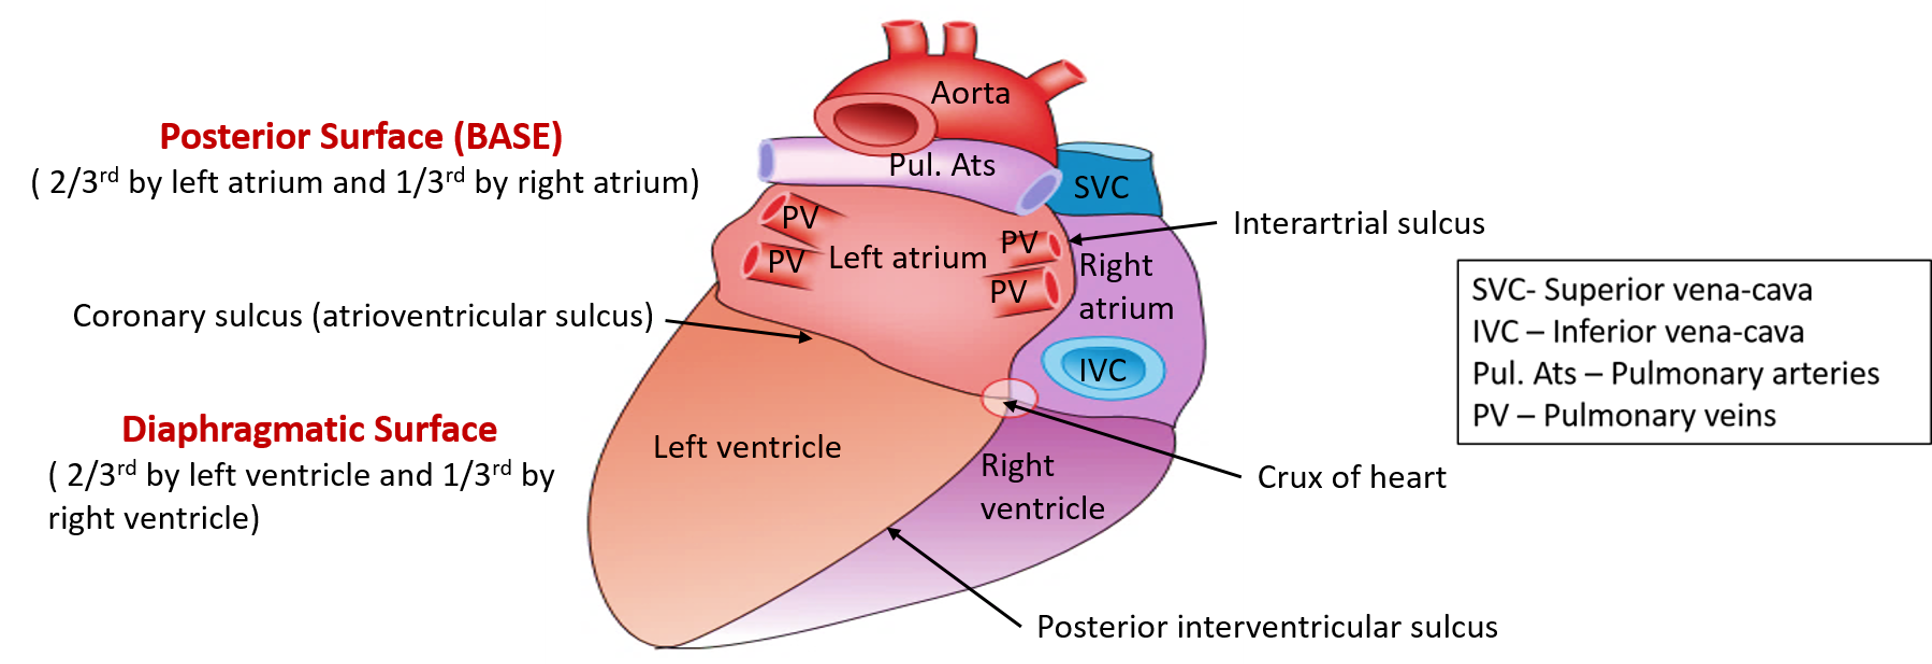 base and diaphragmatic surfaces of heart